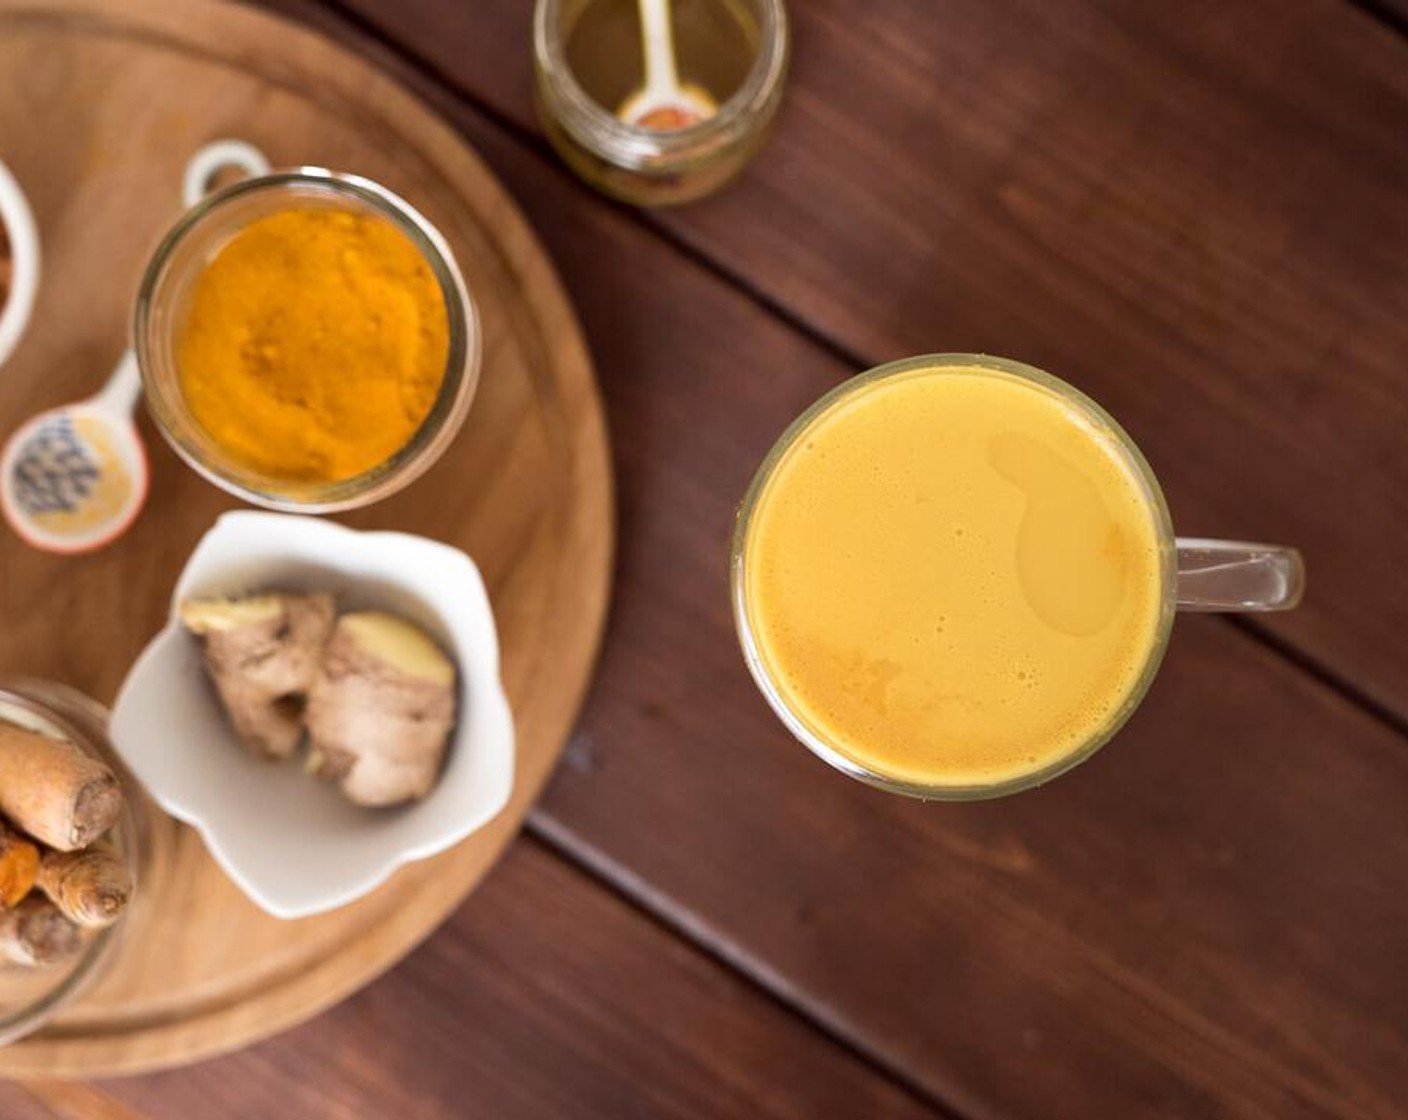 step 1 Combine Coconut Milk (1 cup), Fresh Turmeric (1 Tbsp), and Fresh Ginger (1 tsp) in a bowl. Let sit for 5 to 10 minutes. Strain through a wire mesh sieve or nut bag. Add Maple Syrup (1 Tbsp).